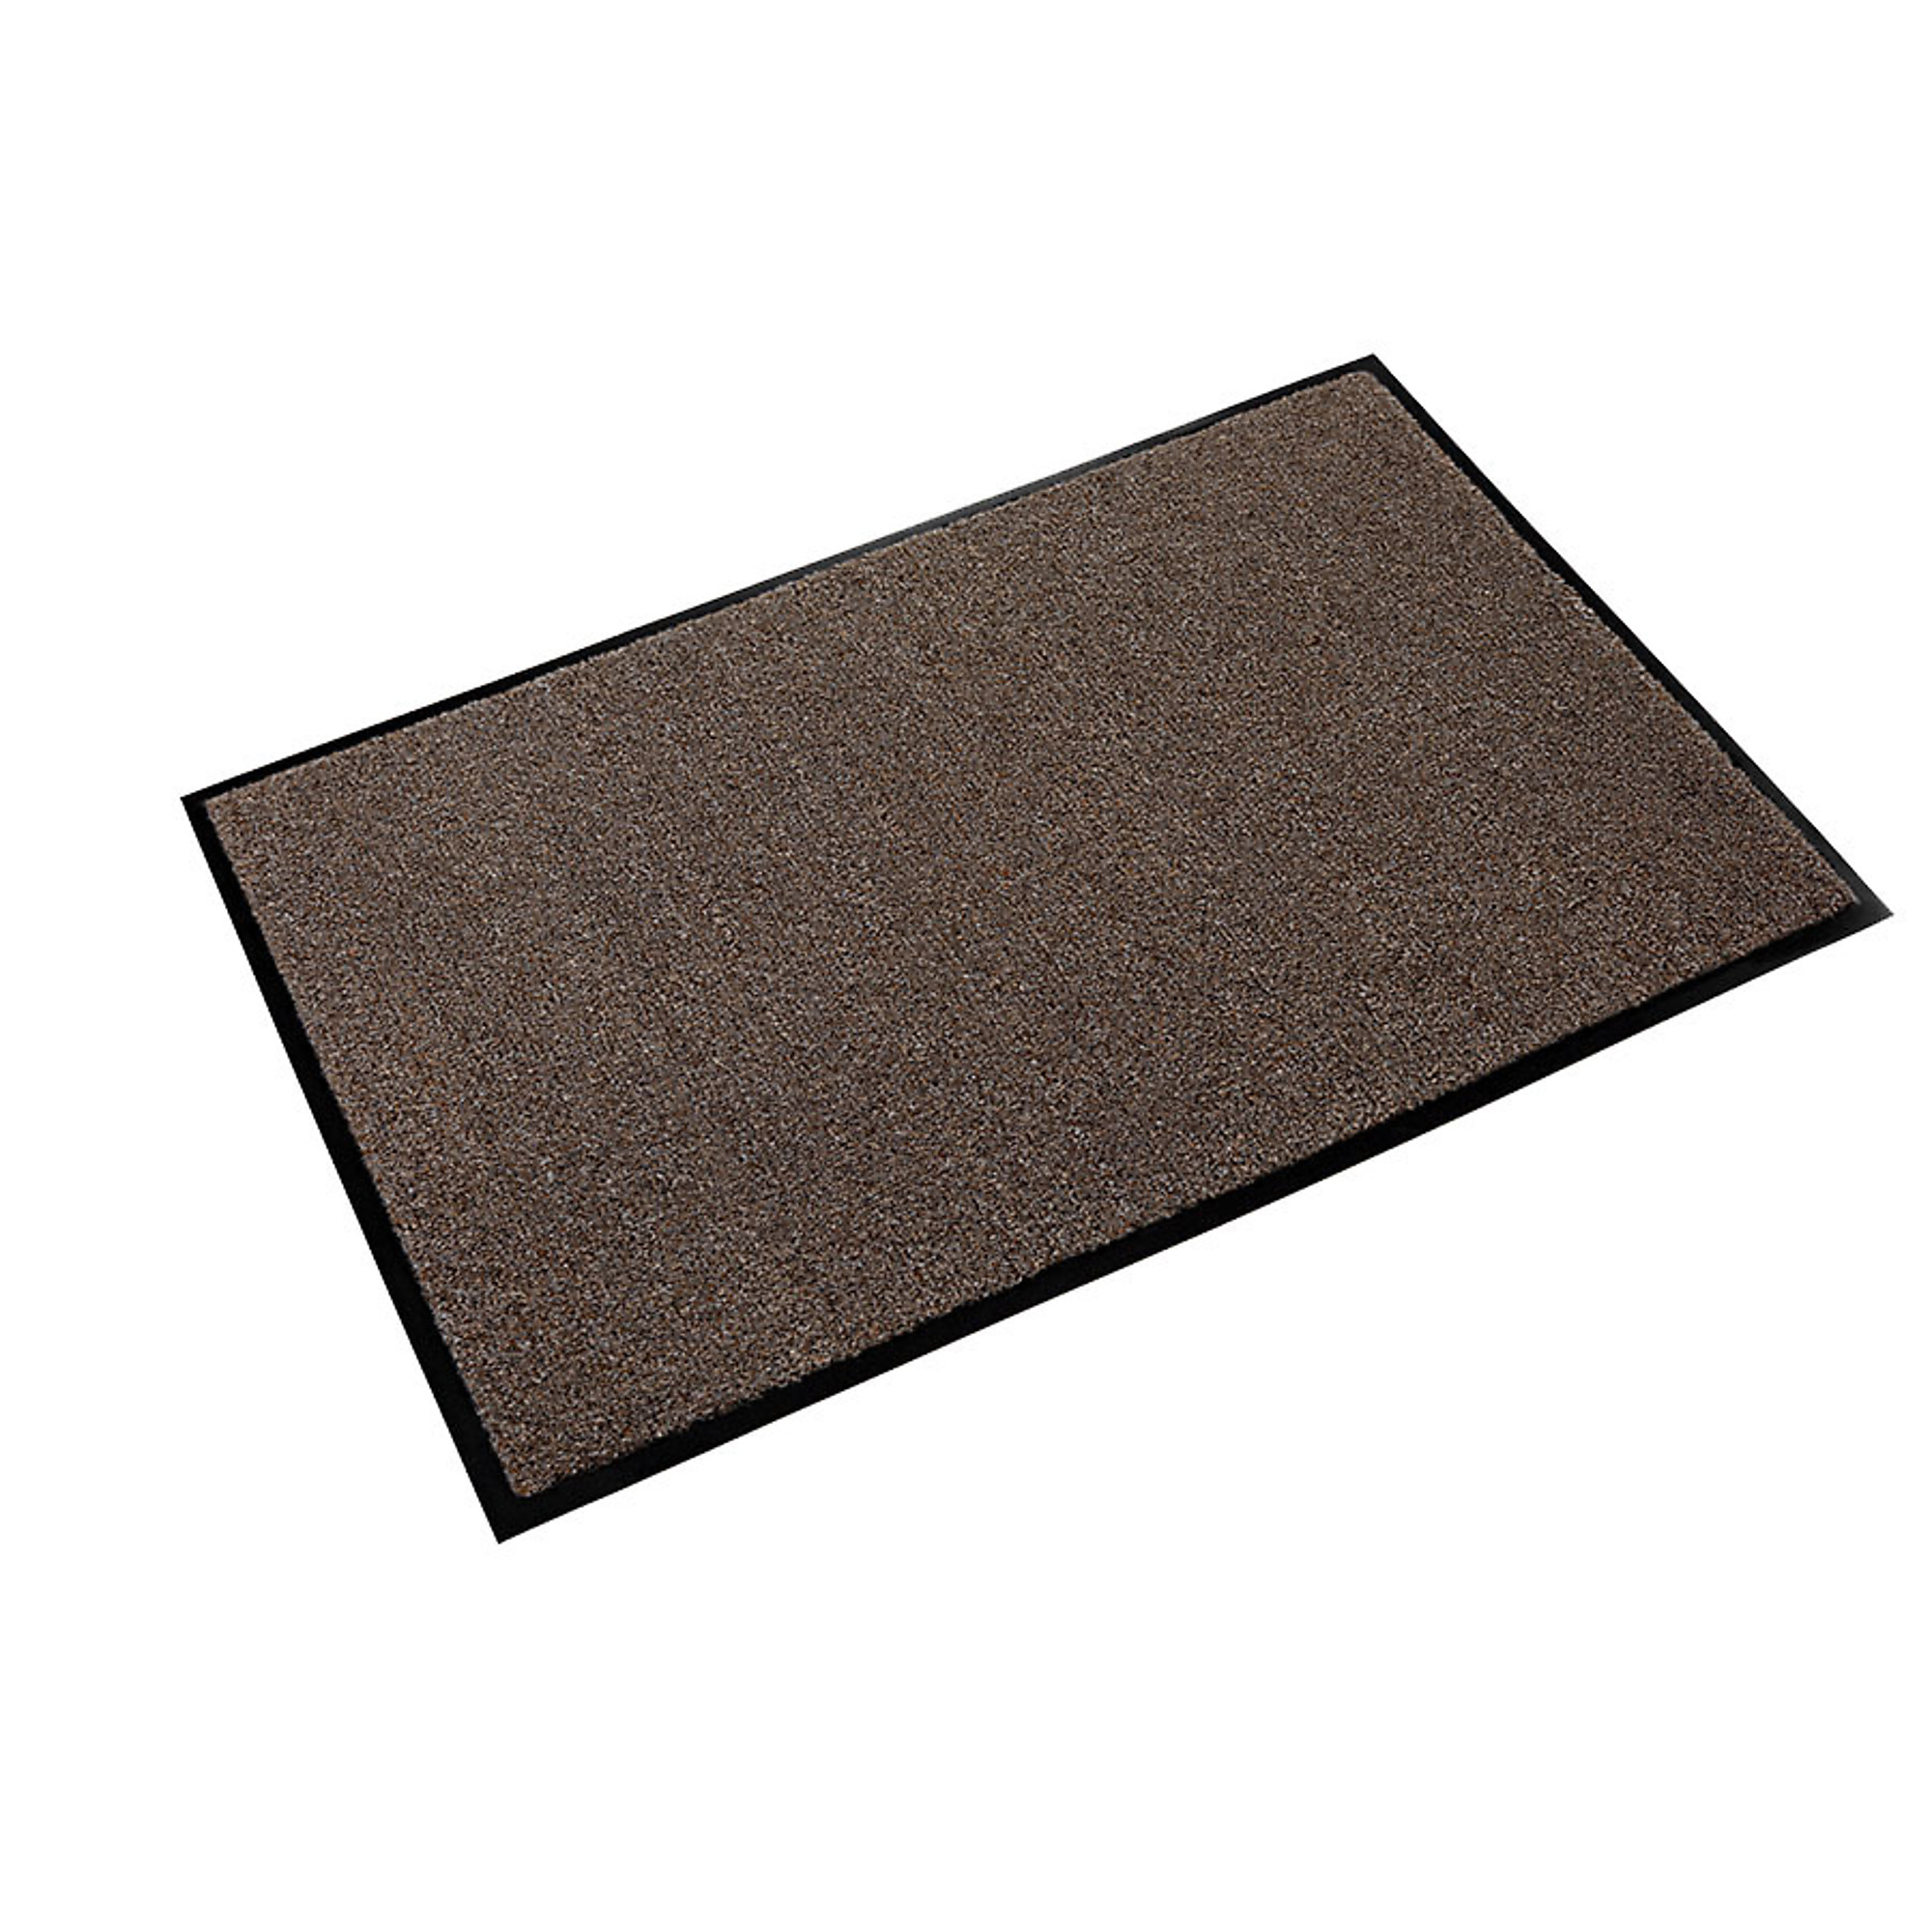 Crown Matting Technologies, Rely-On Olefin 6ft.x60ft. Walnut, Width 72 in, Length 720 in, Thickness 3/8 in, Model GSR0072WA